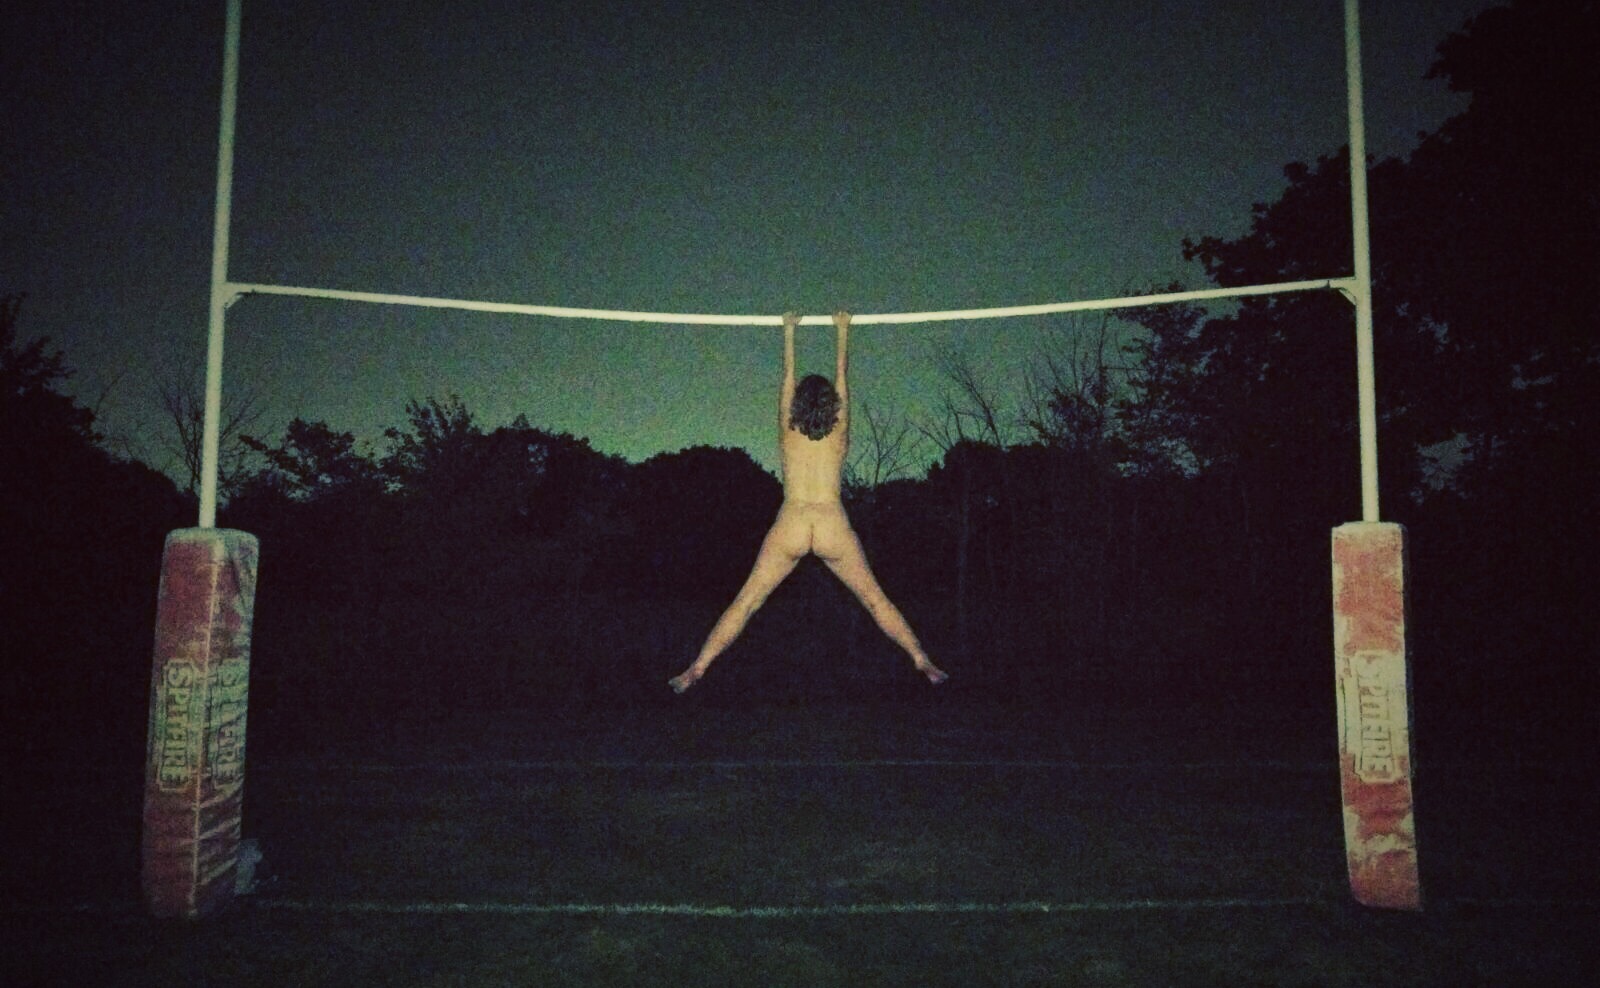 Naked me hanging under the crossbar of a rugby goal